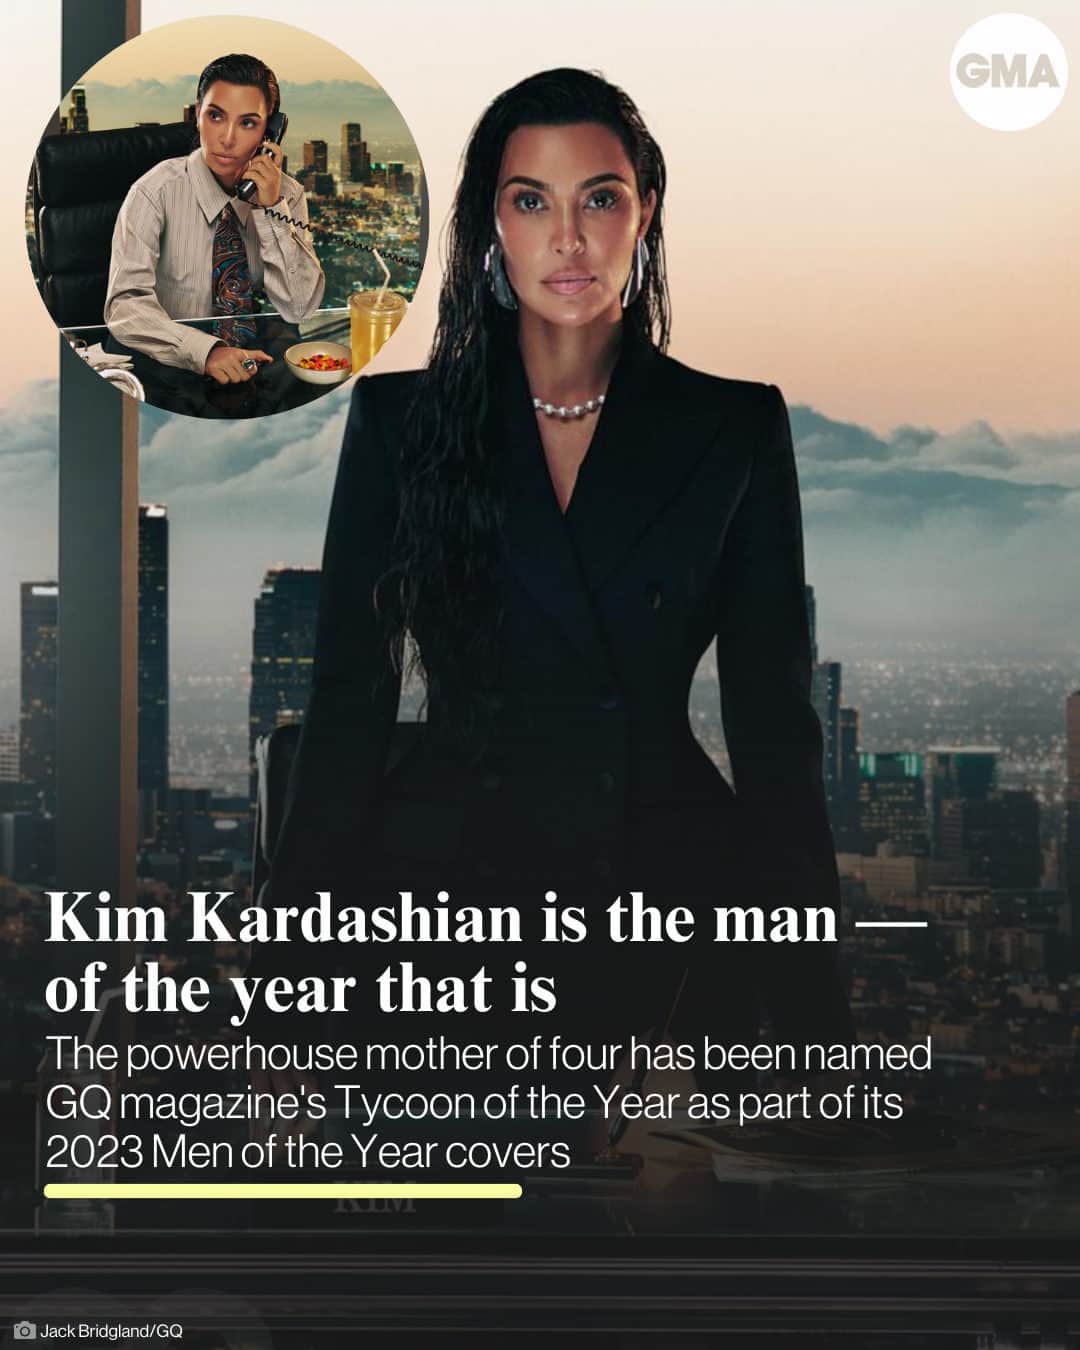 Good Morning Americaのインスタグラム：「Kim Kardashian is the man -- of the year, that is.  The powerhouse mother of four has been named GQ magazine's Tycoon of the Year as part of its 2023 Men of the Year covers.  Kardashian, alongside two of her fellow honorees, actor Jacob Elordi and rapper Travis Scott, opened up in the accompanying cover interview about the death of her father, the O.J Simpson trial and other revealing life moments.  The reality star is a successful businesswoman in real life -- as GQ notes, she has "launched two beauty lines, several perfumes, an energy drink, a mobile game, and a private equity fund" -- and recently expanded her viral shapewear business, SKIMS, to include menswear.  Find more from her interview with GQ at our link in bio.」